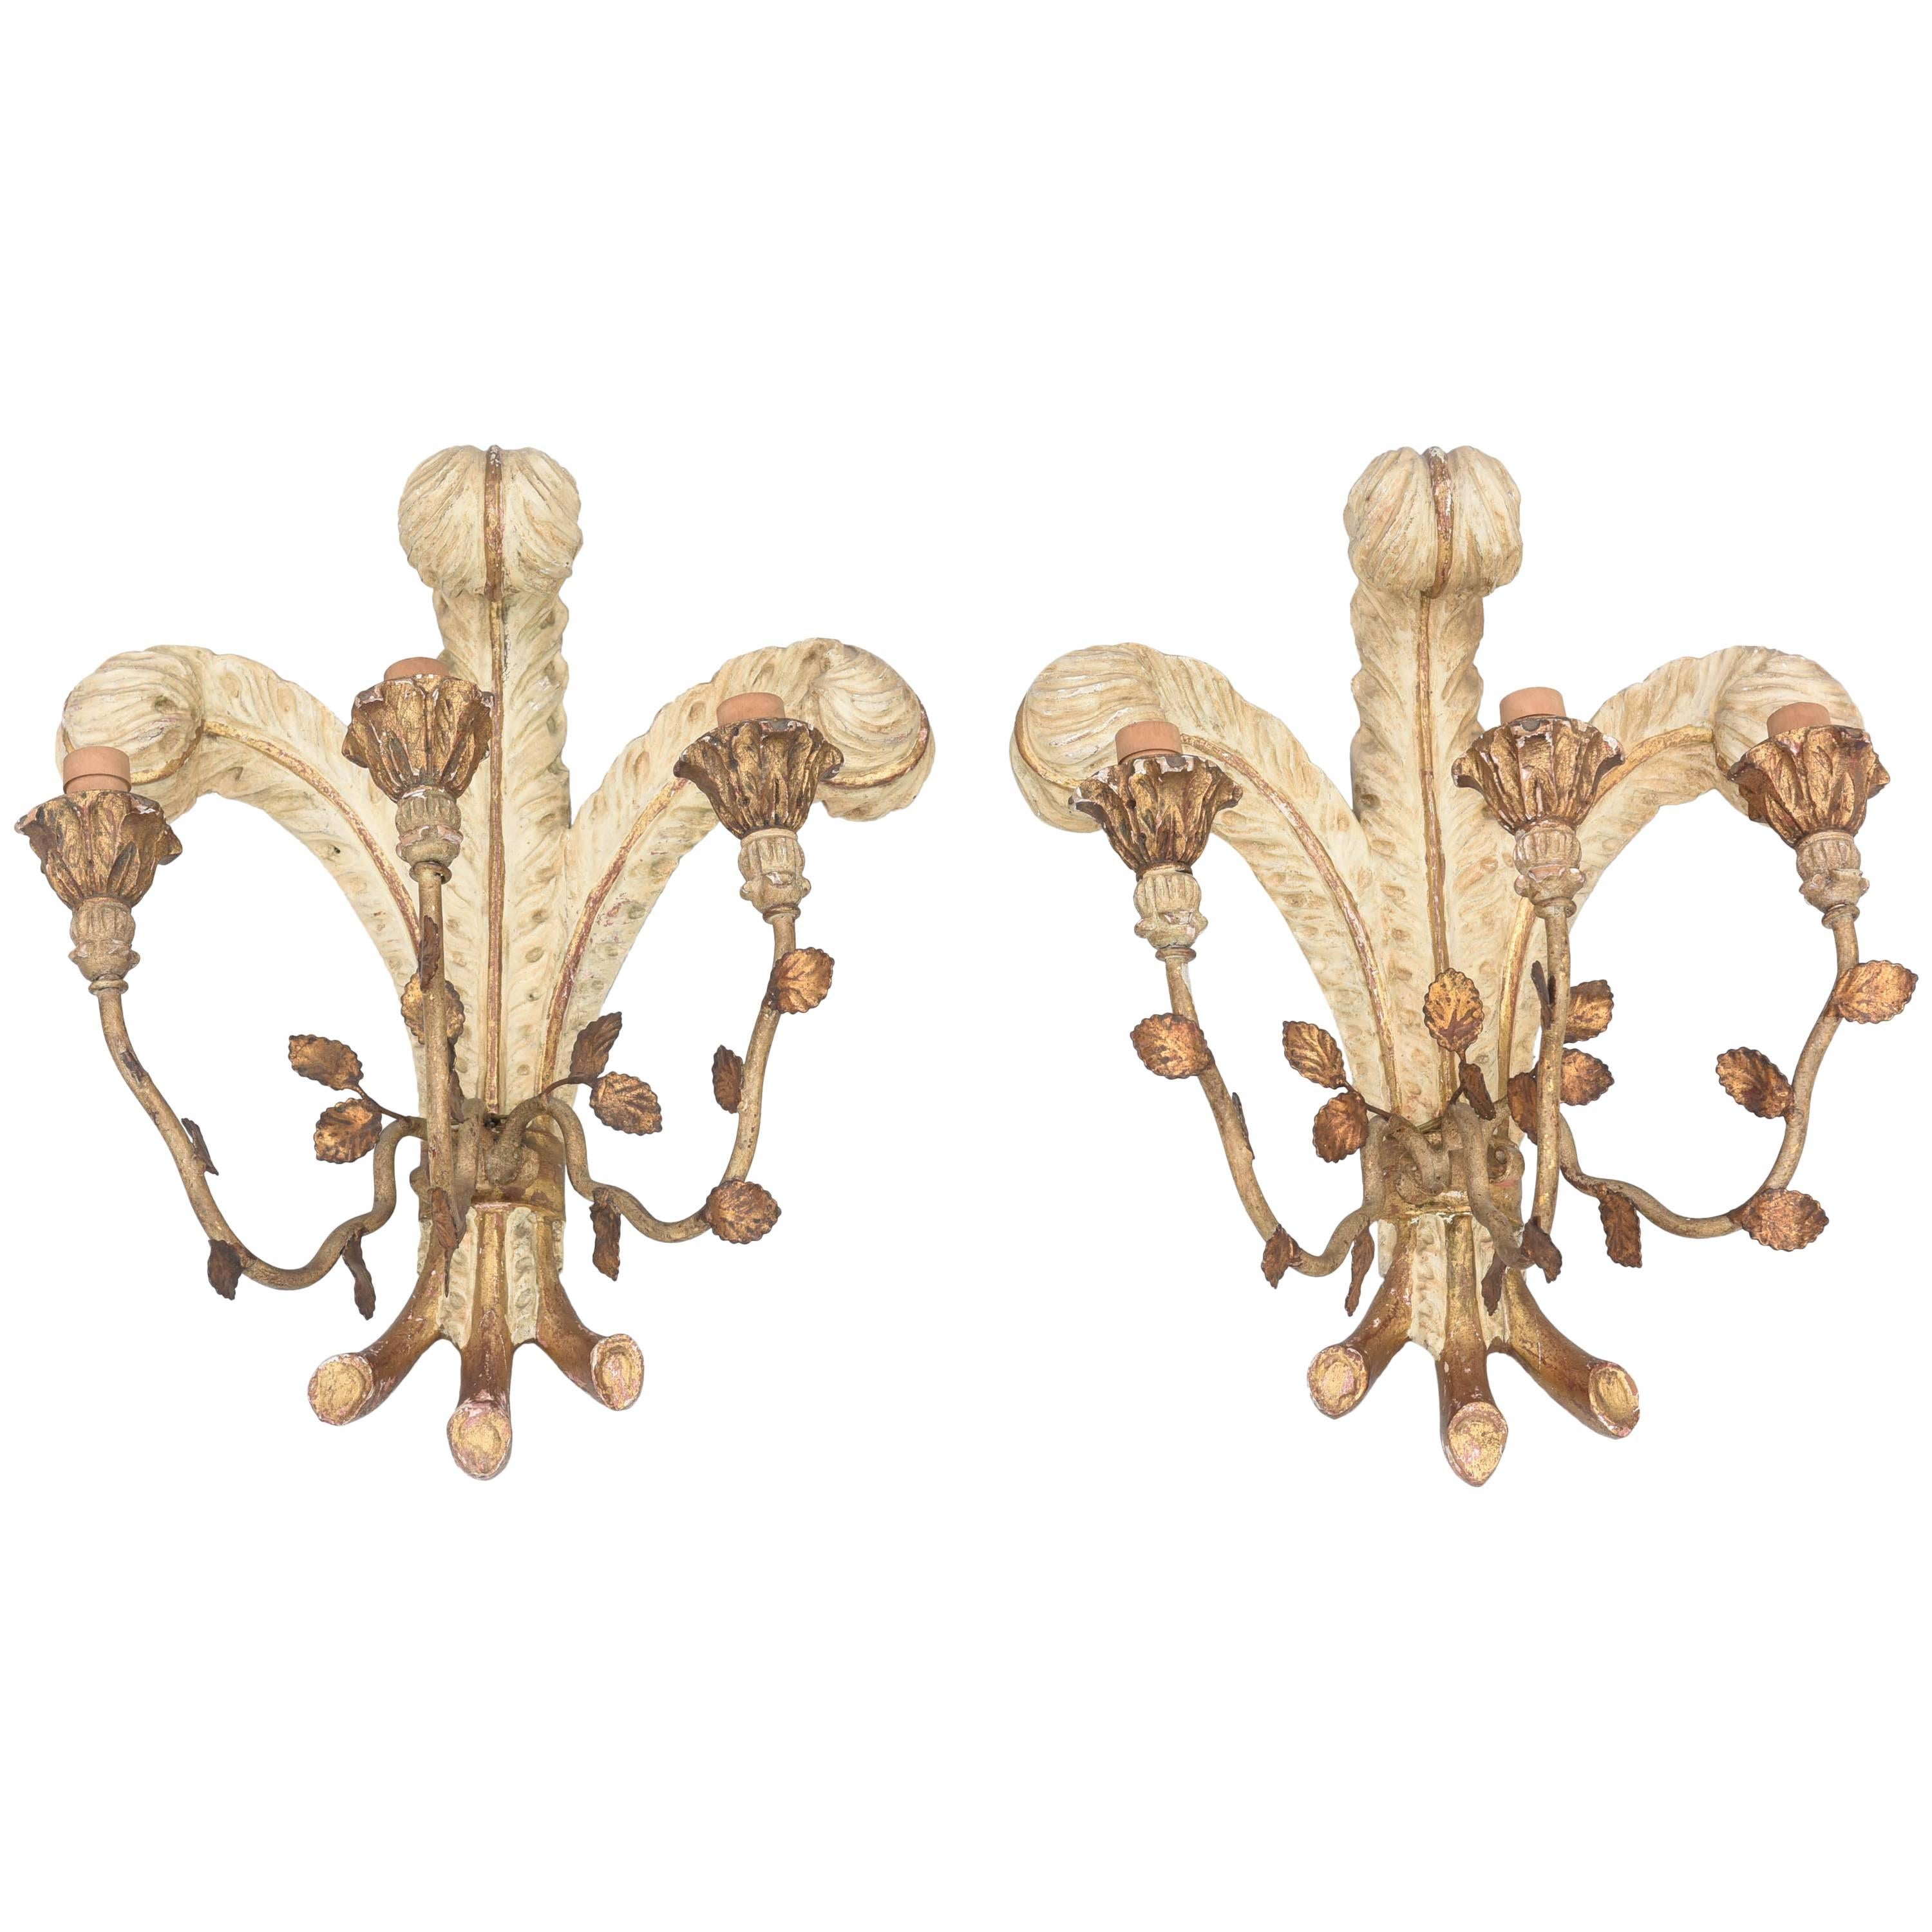 Unusual Pair of Italian Carved Wood "Duke of Windsor" Wall Sconces For Sale